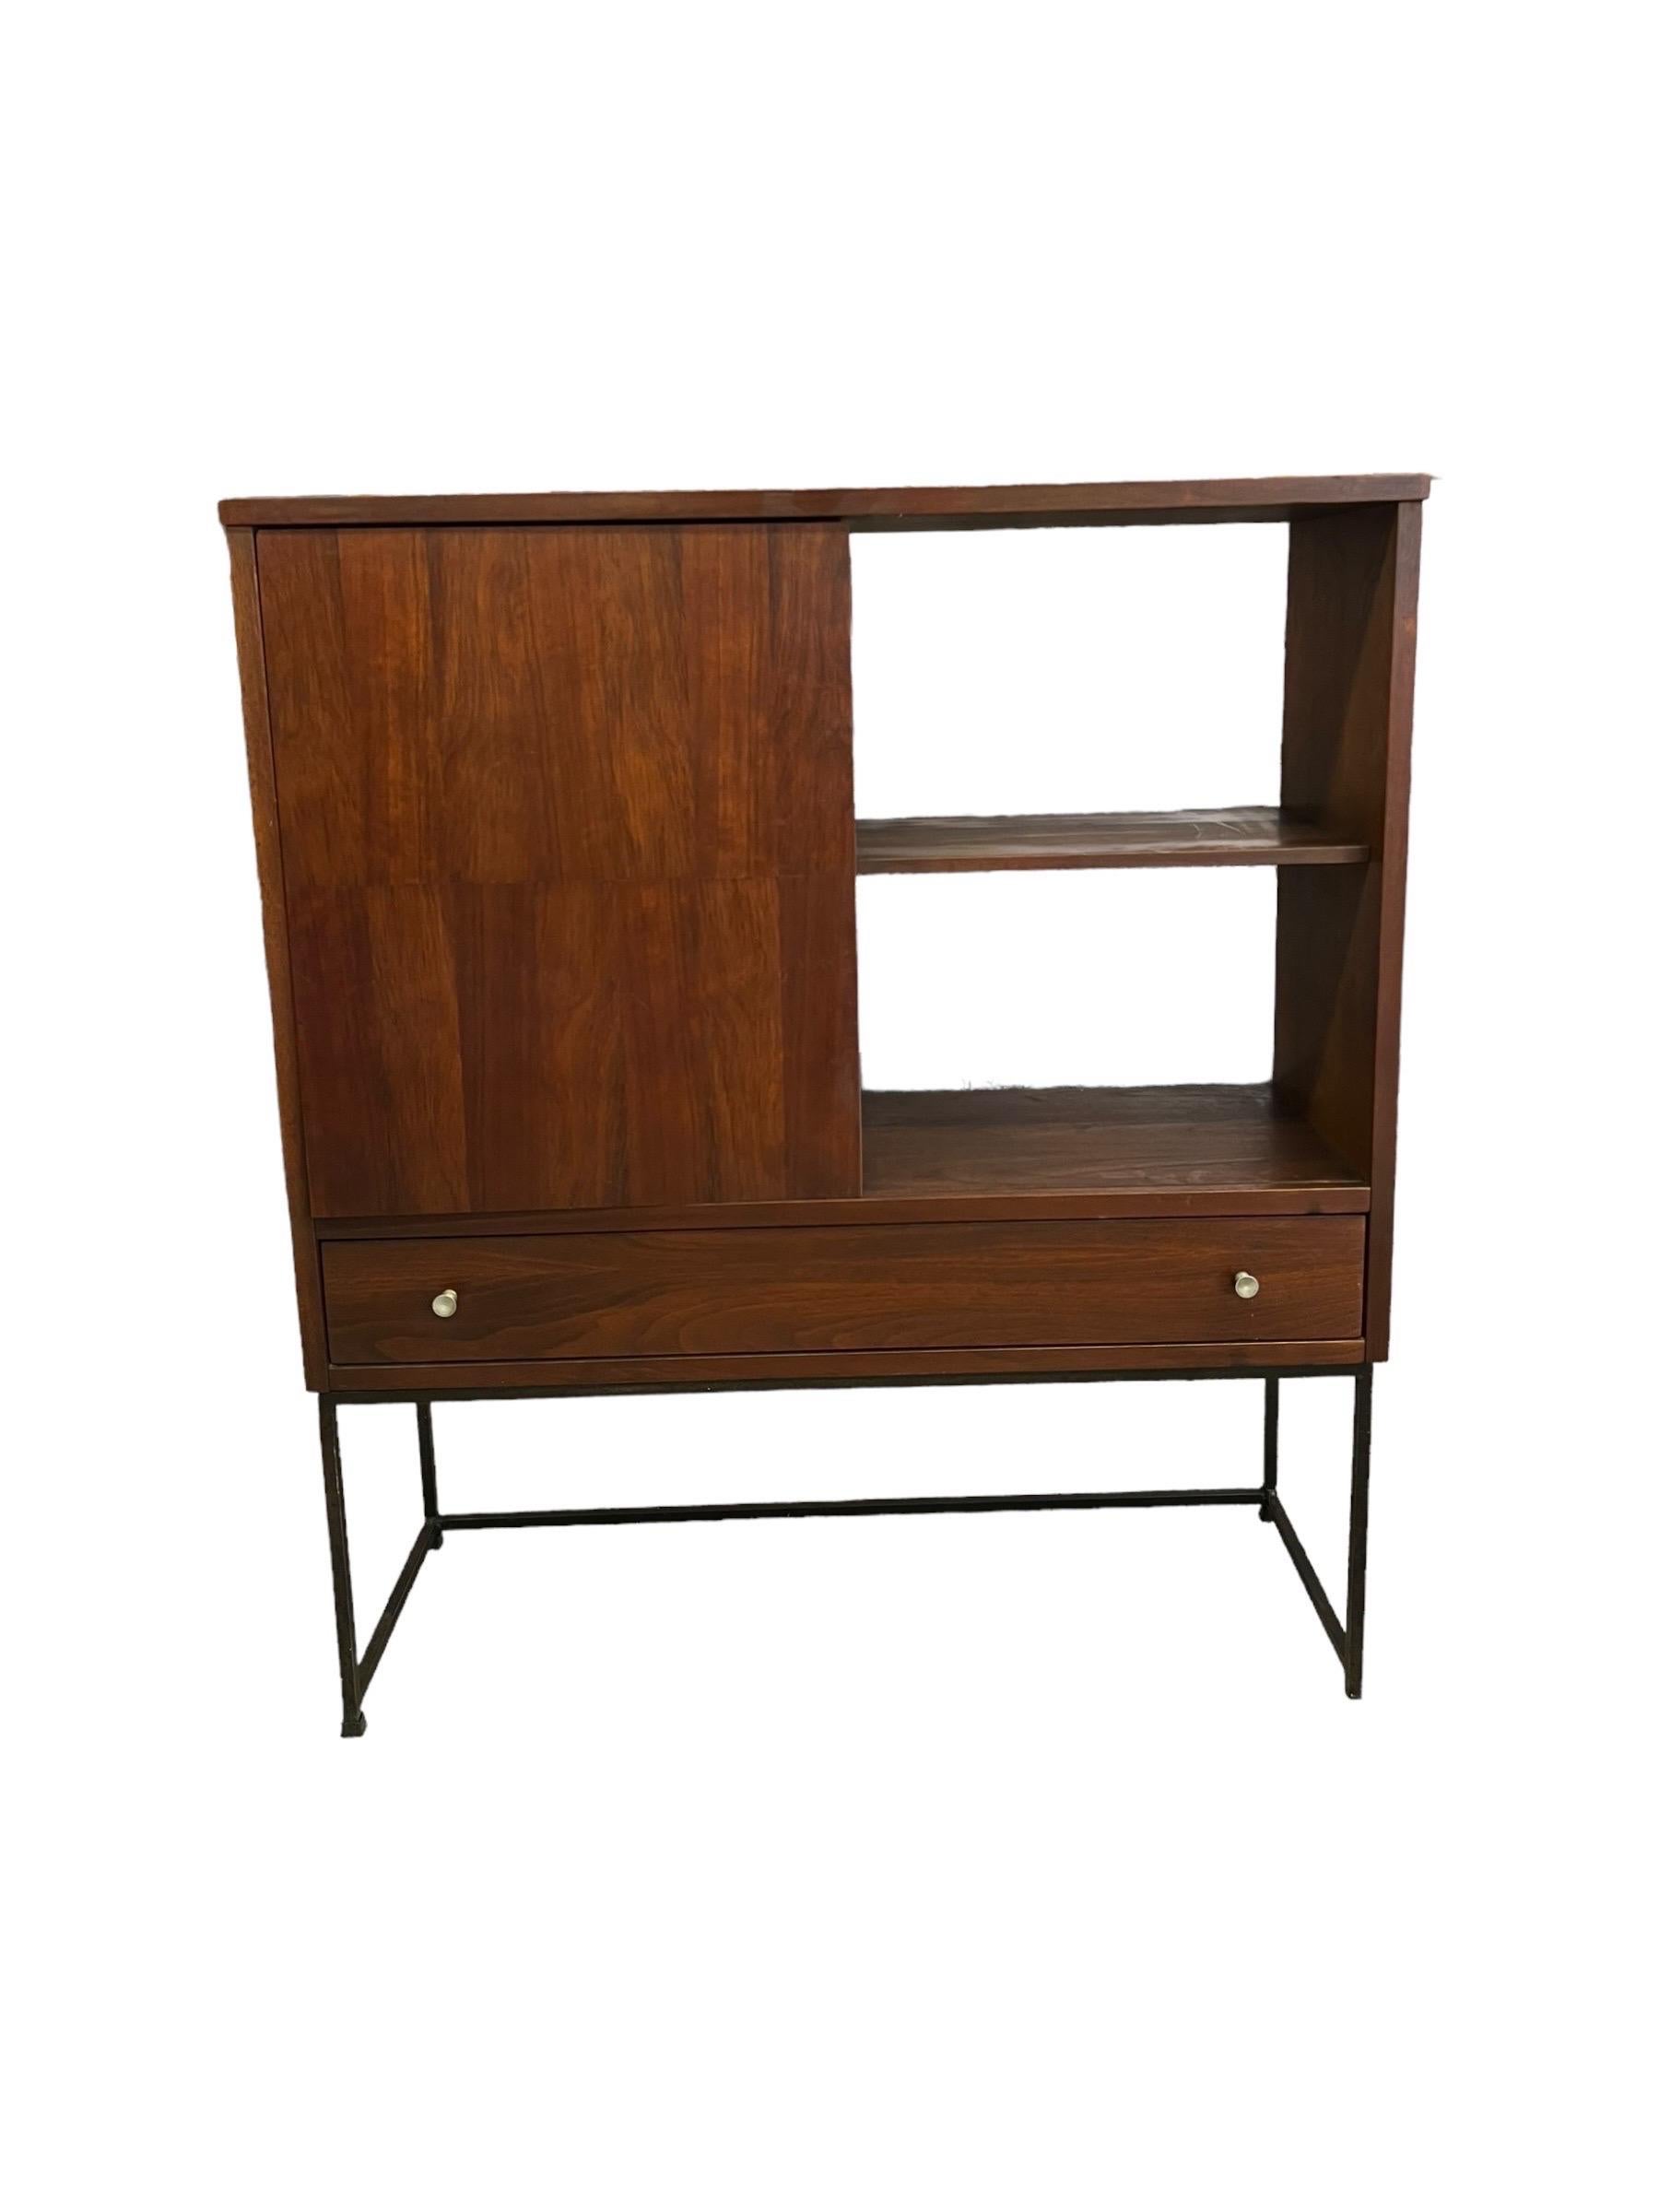 Late 20th Century Vintage Mid Century Modern Bookshelf With Sliding Door and Dovetailed Drawers For Sale